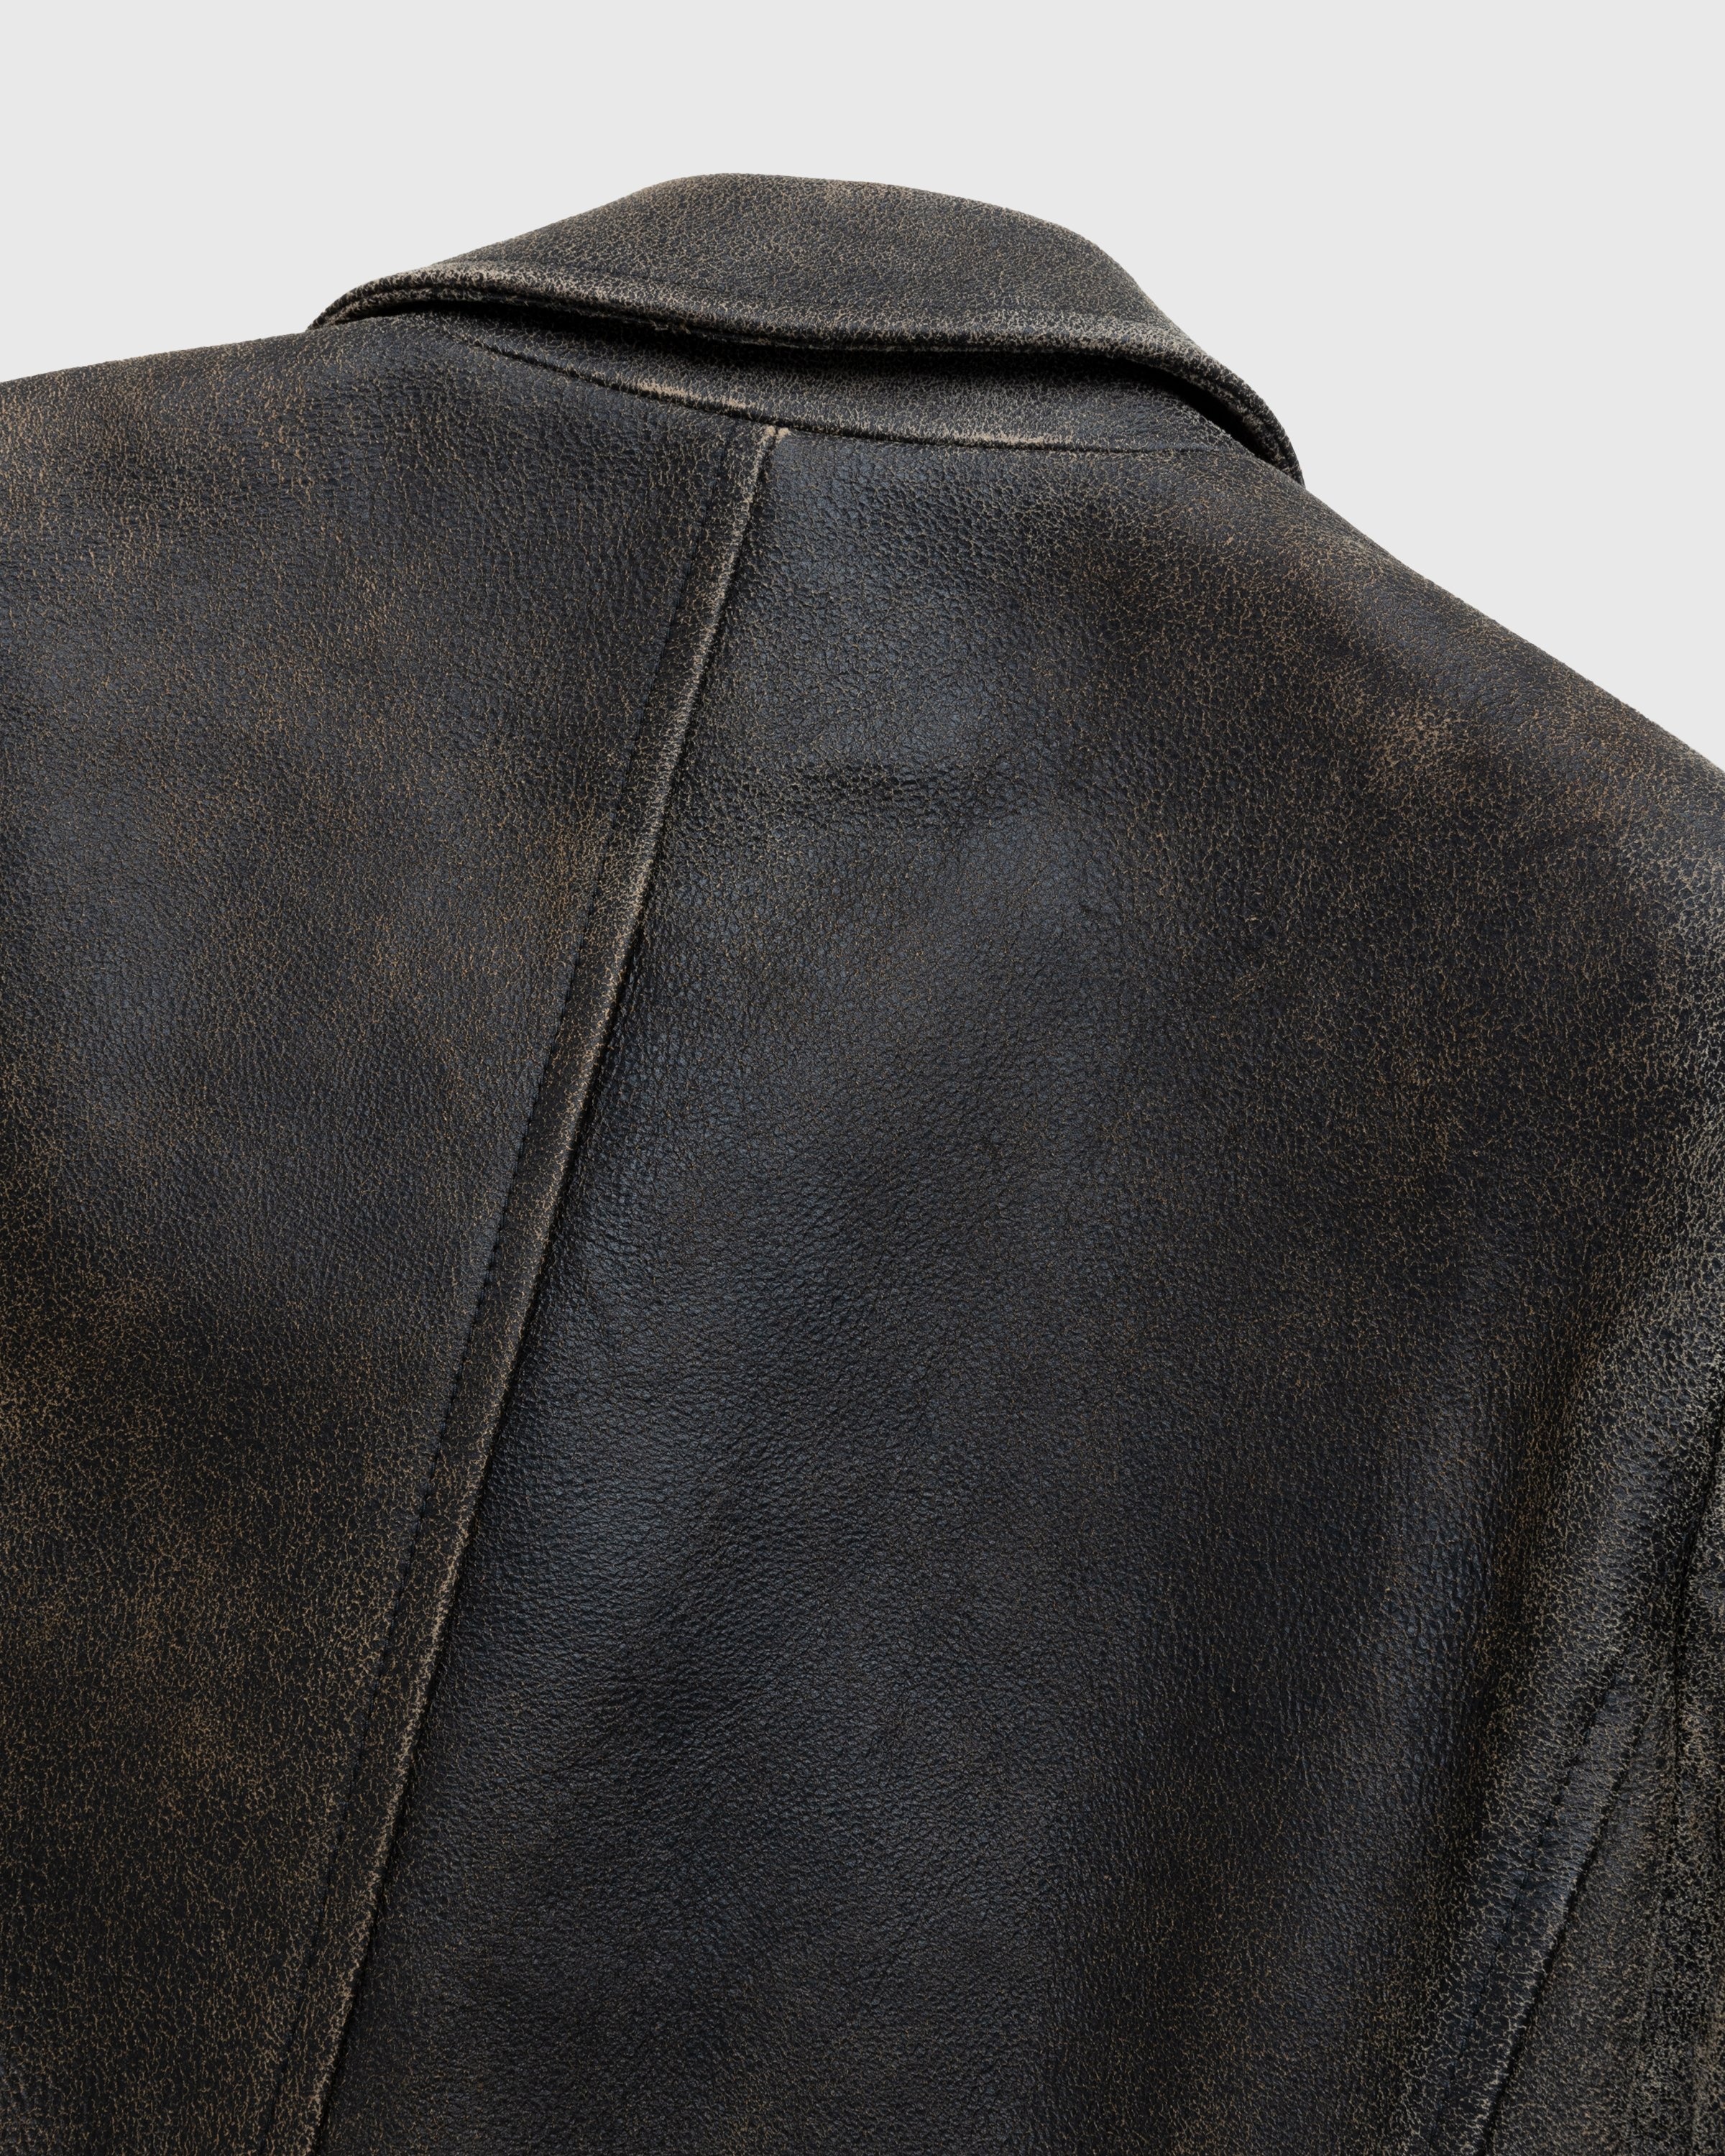 Diesel – Treat Cracked Leather Coat Brown - Leather Jackets - Brown - Image 6